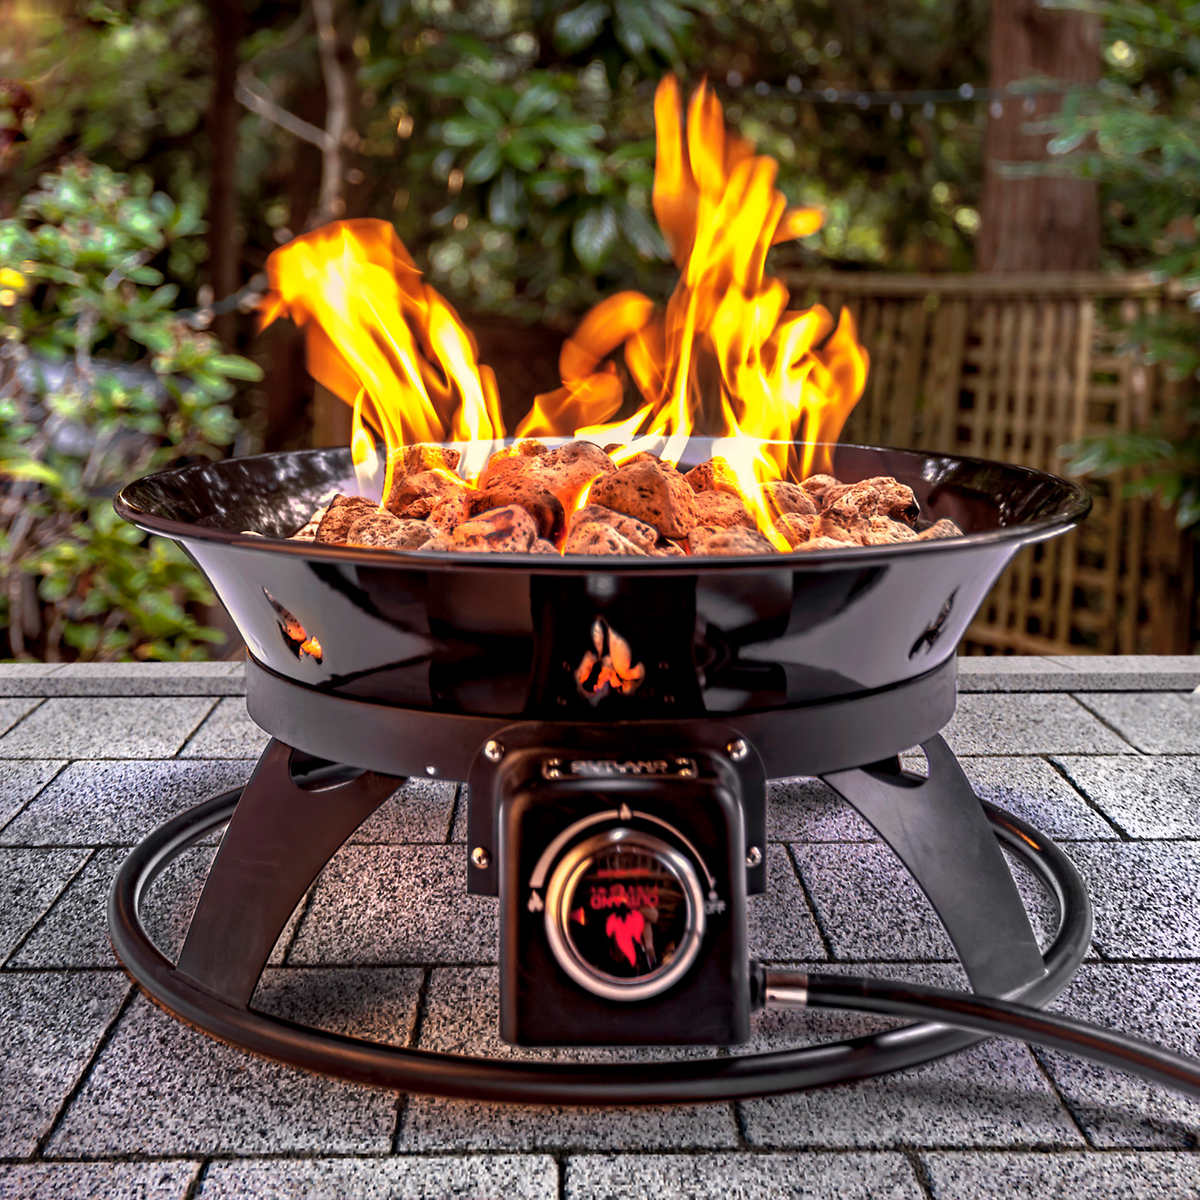 Outland Firebowl Outdoor Firepit Costco, Costco Wood Burning Fire Pit